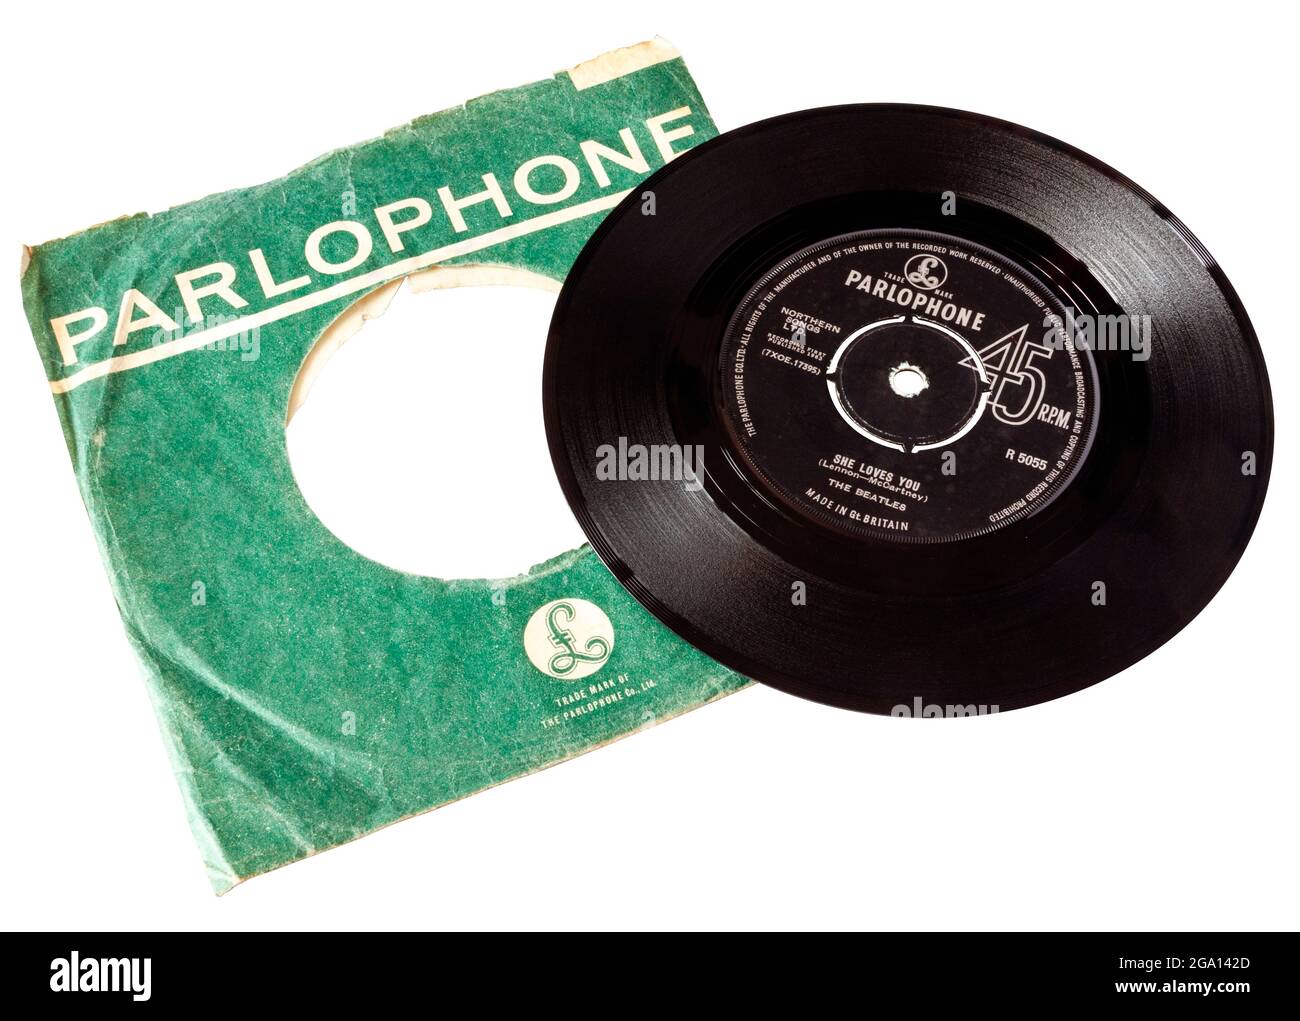 A 7' 45rpm single vinyl record of 'She Loves You' by The Beatles with original Parlophone sleeve, isolated on a white background, with clipping path Stock Photo